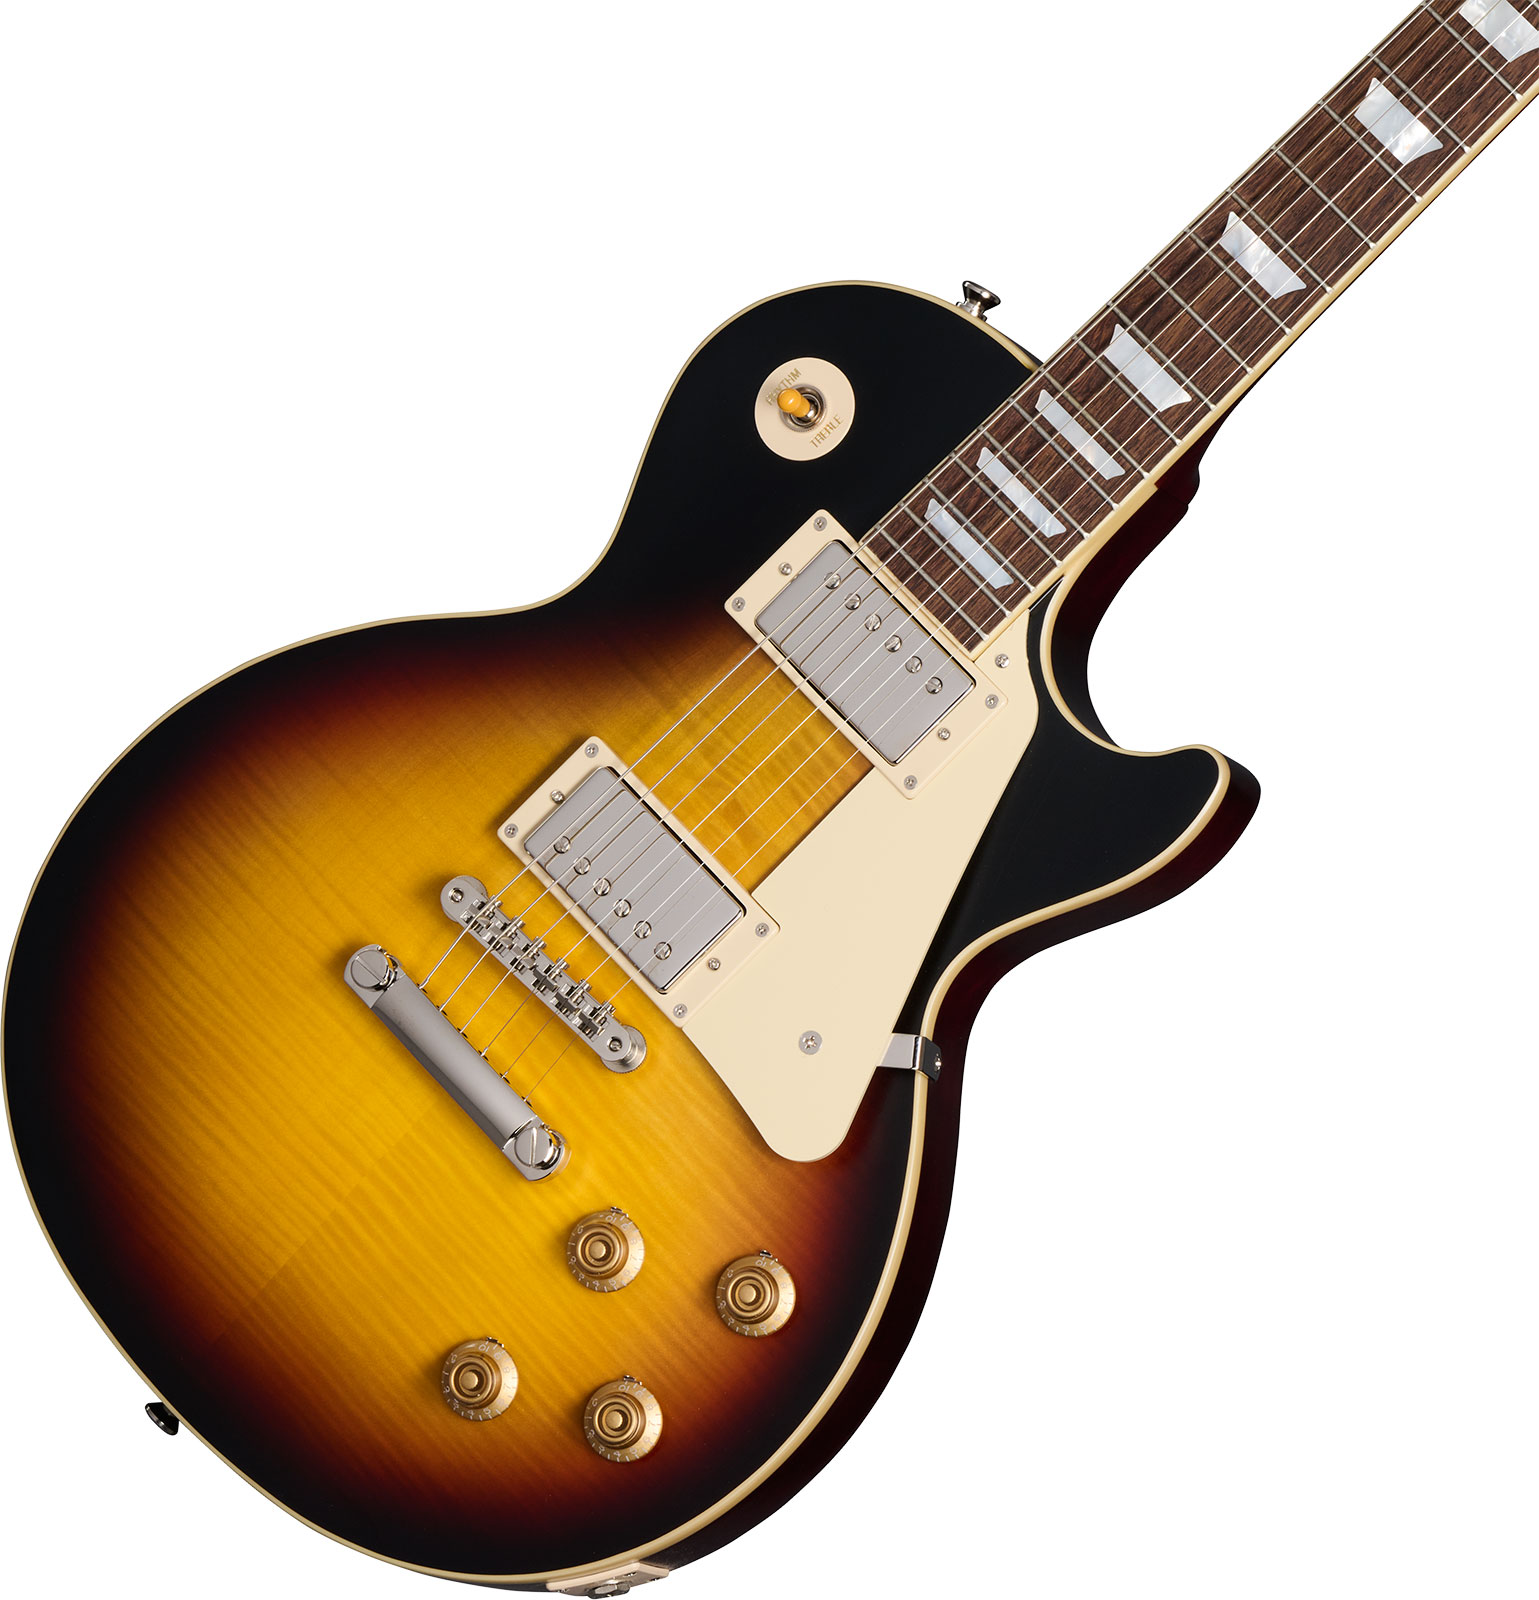 Epiphone 1959 Les Paul Standard Inspired By 2h Gibson Ht Lau - Vos Tobacco Burst - Single cut electric guitar - Variation 3